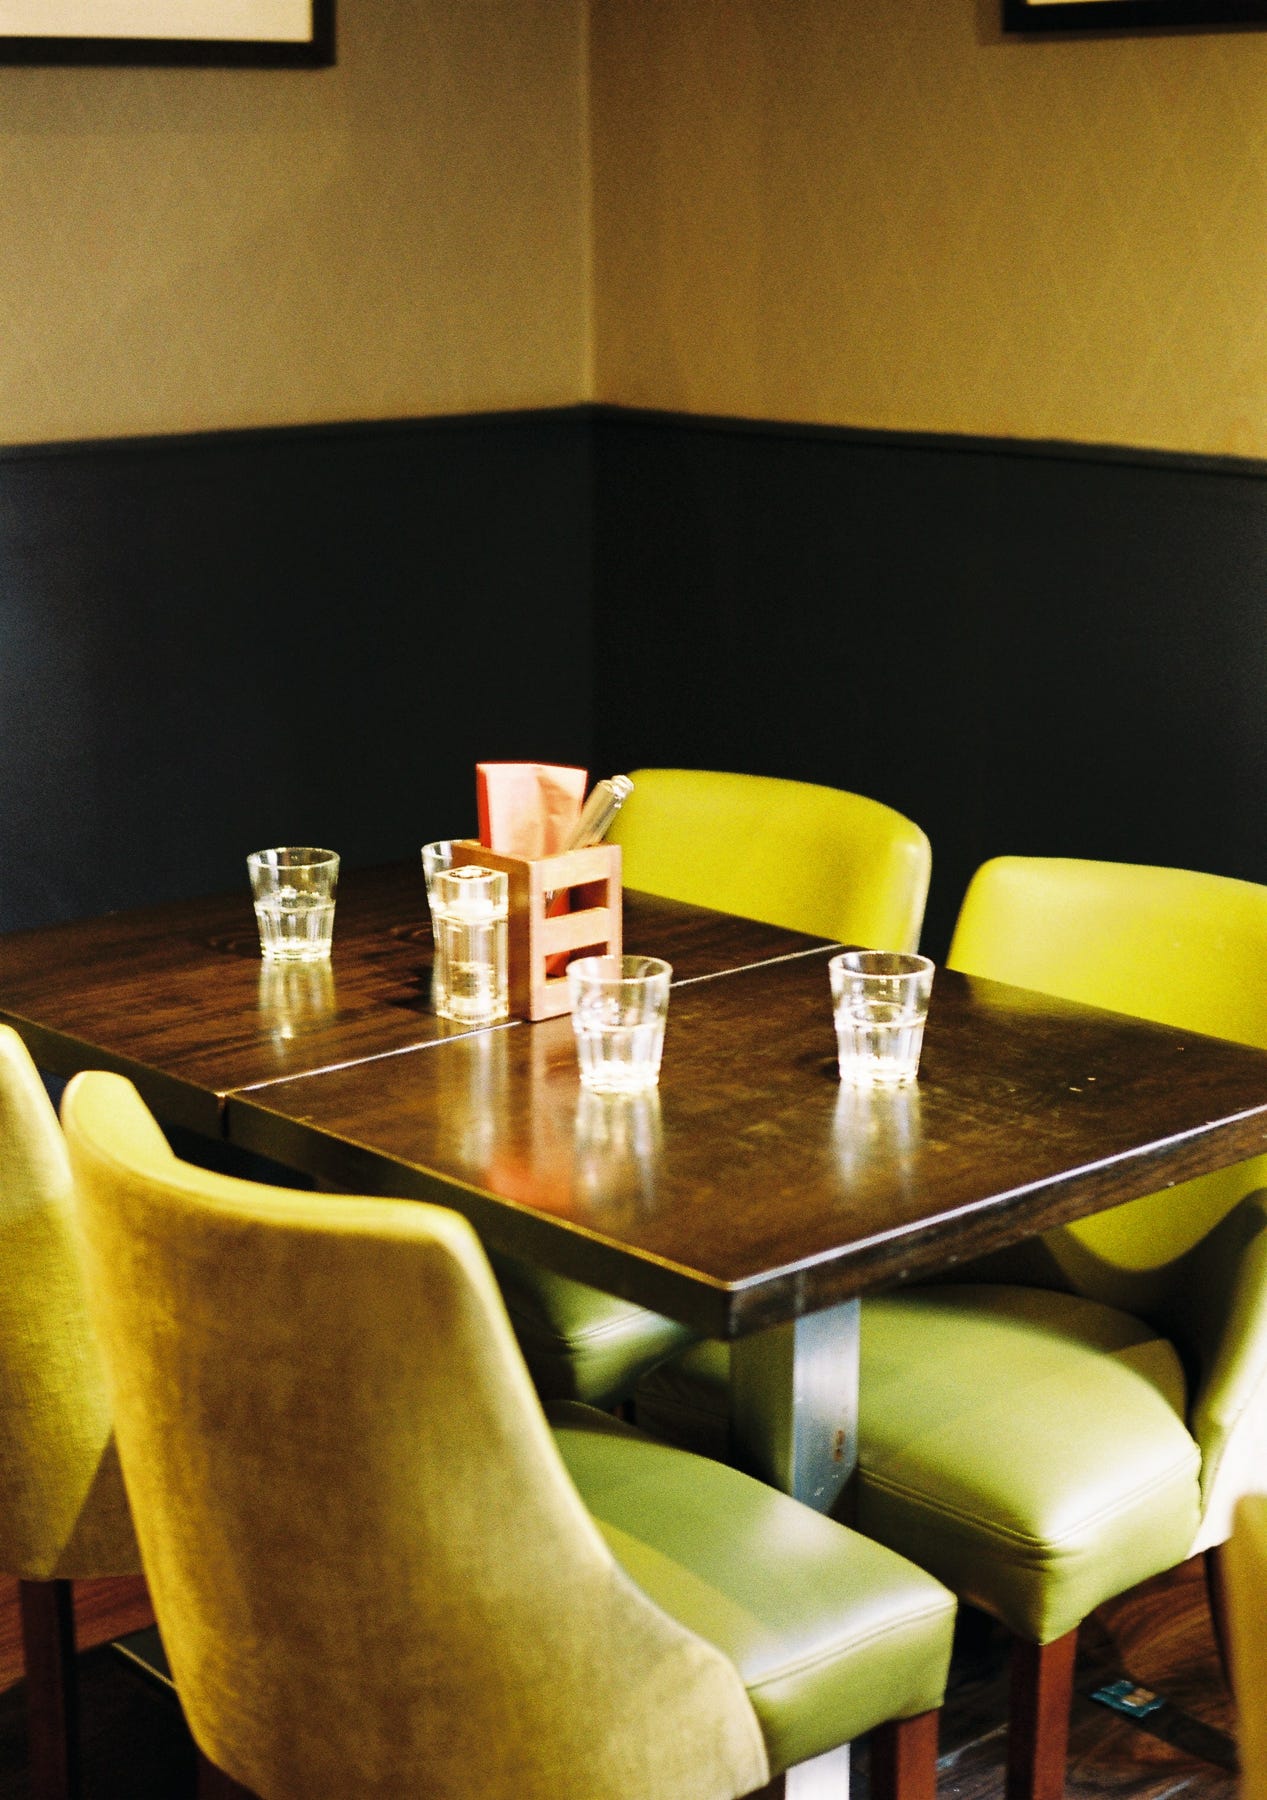 An empty table in a bar restaurant with water glasses. The chairs a greenish yellow, the wall dark at the bottom with dark yellow wallpaper above.